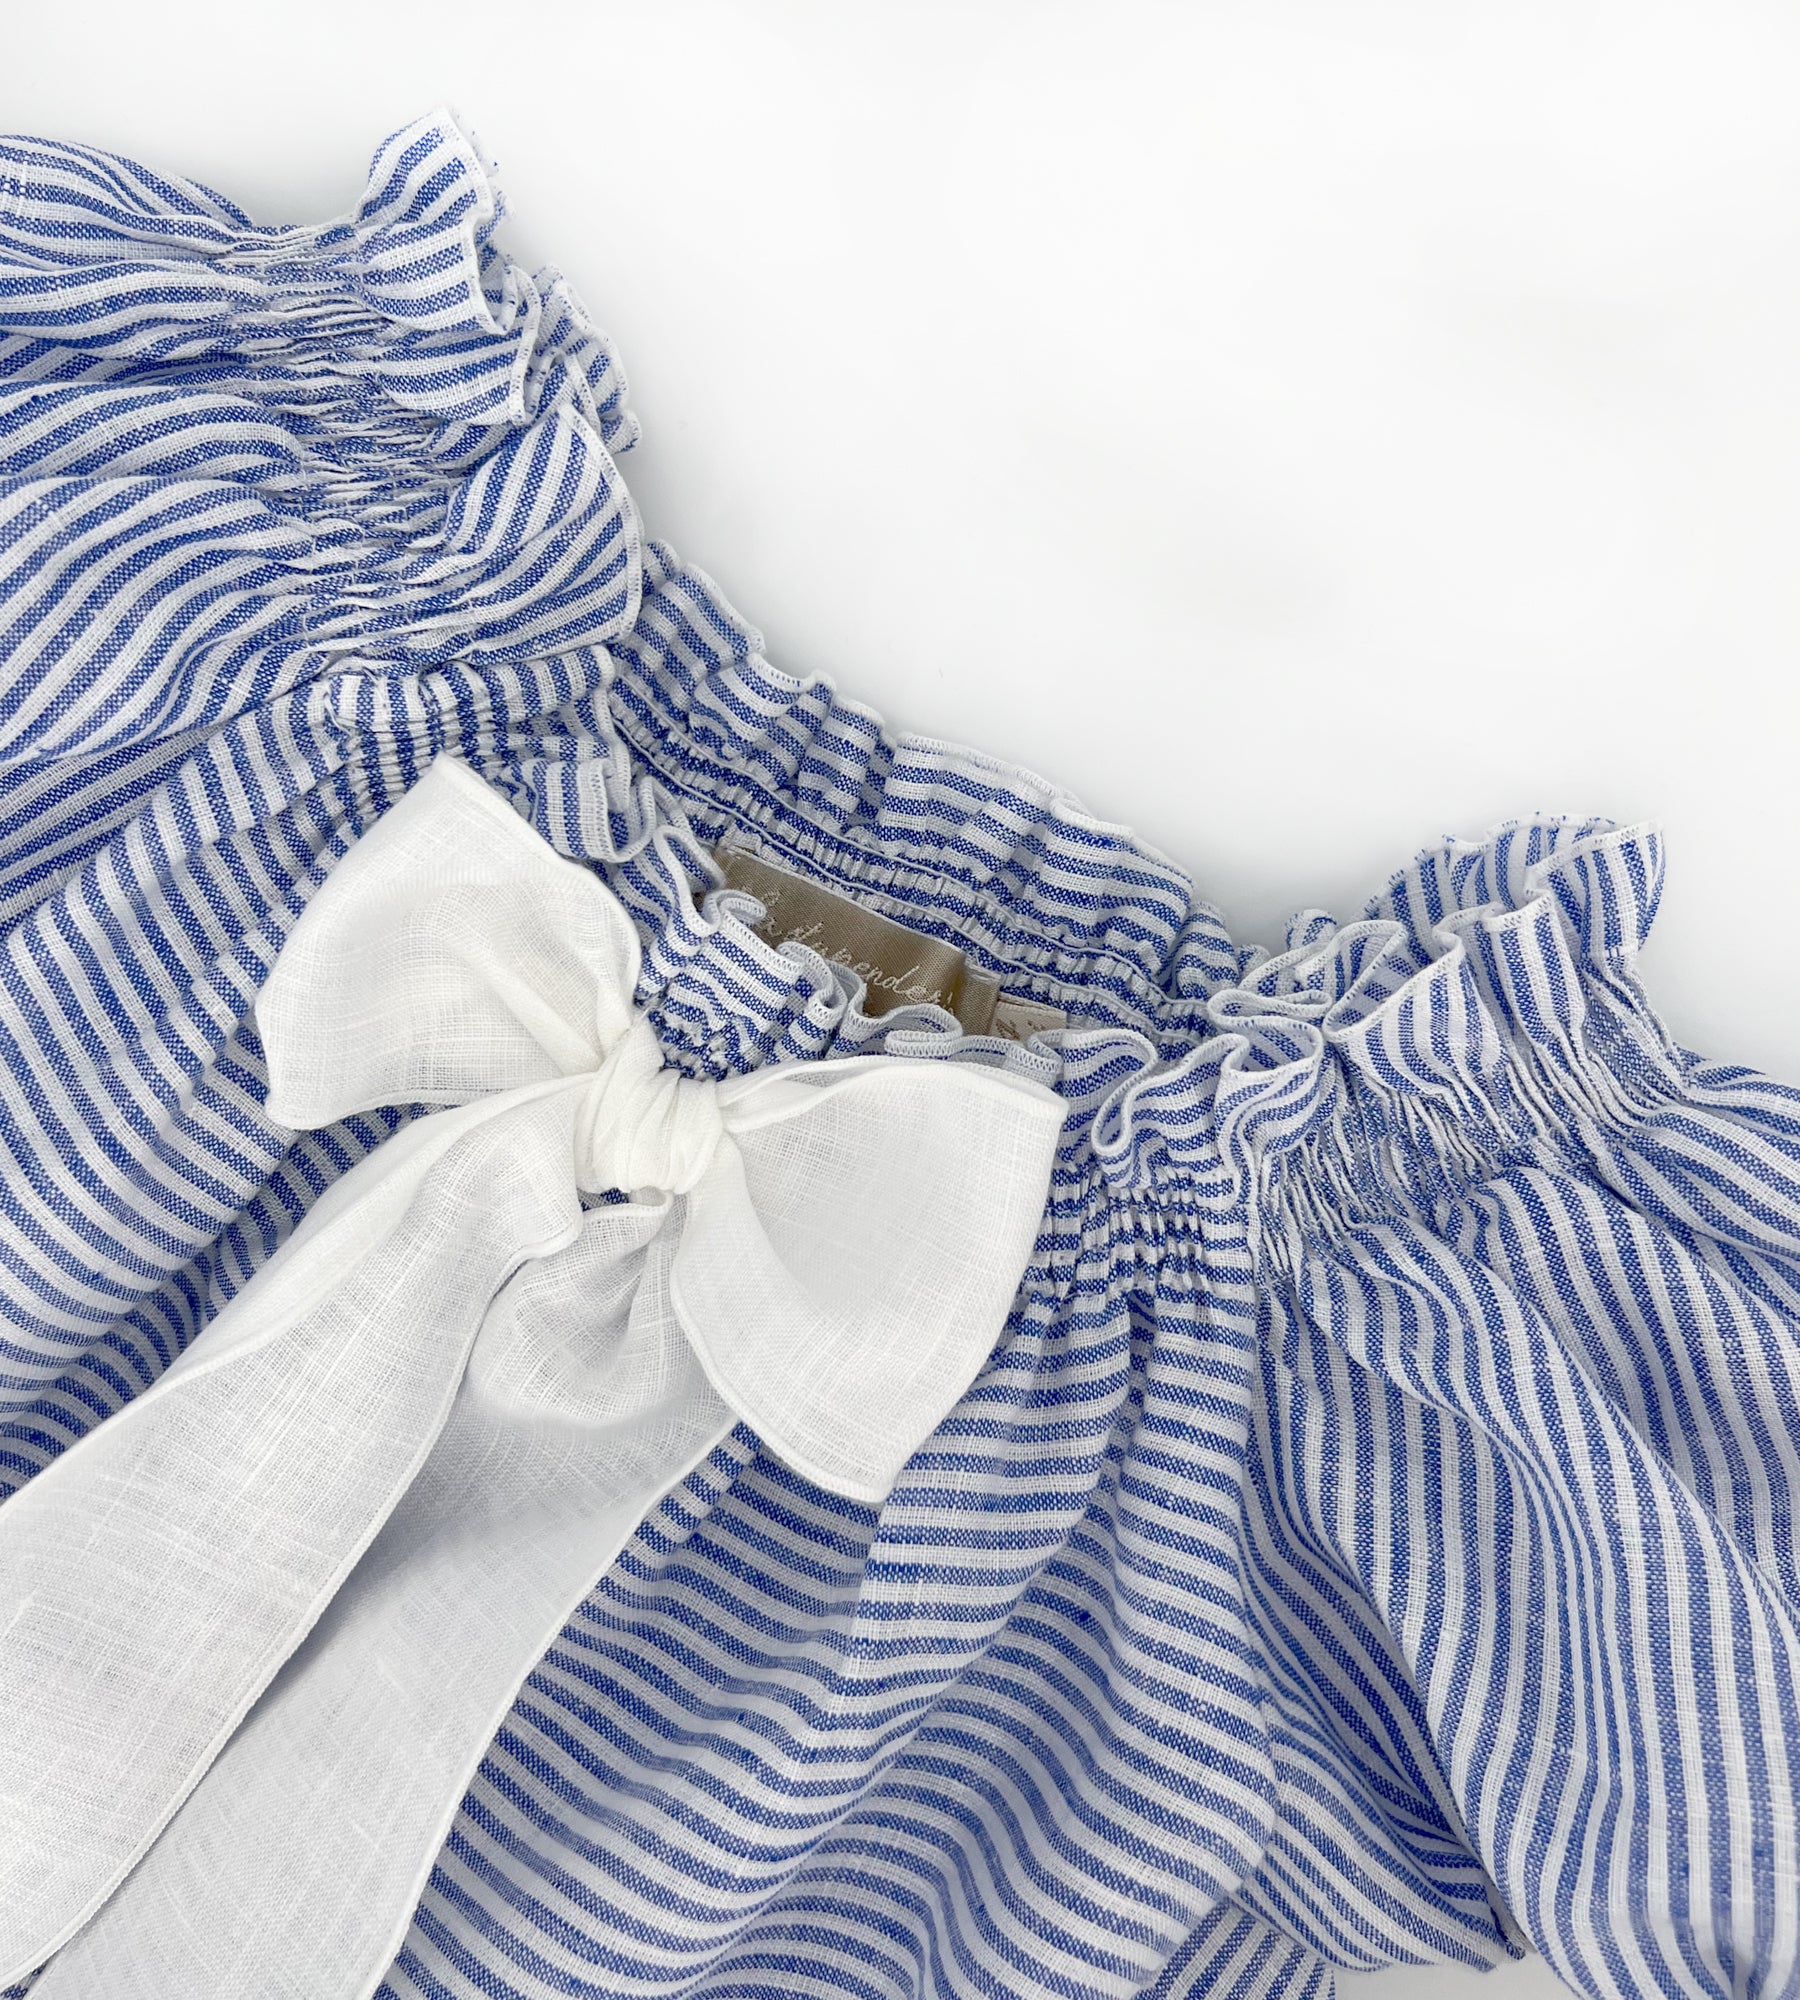 WHITE AND BLUE STRIPED DRESS